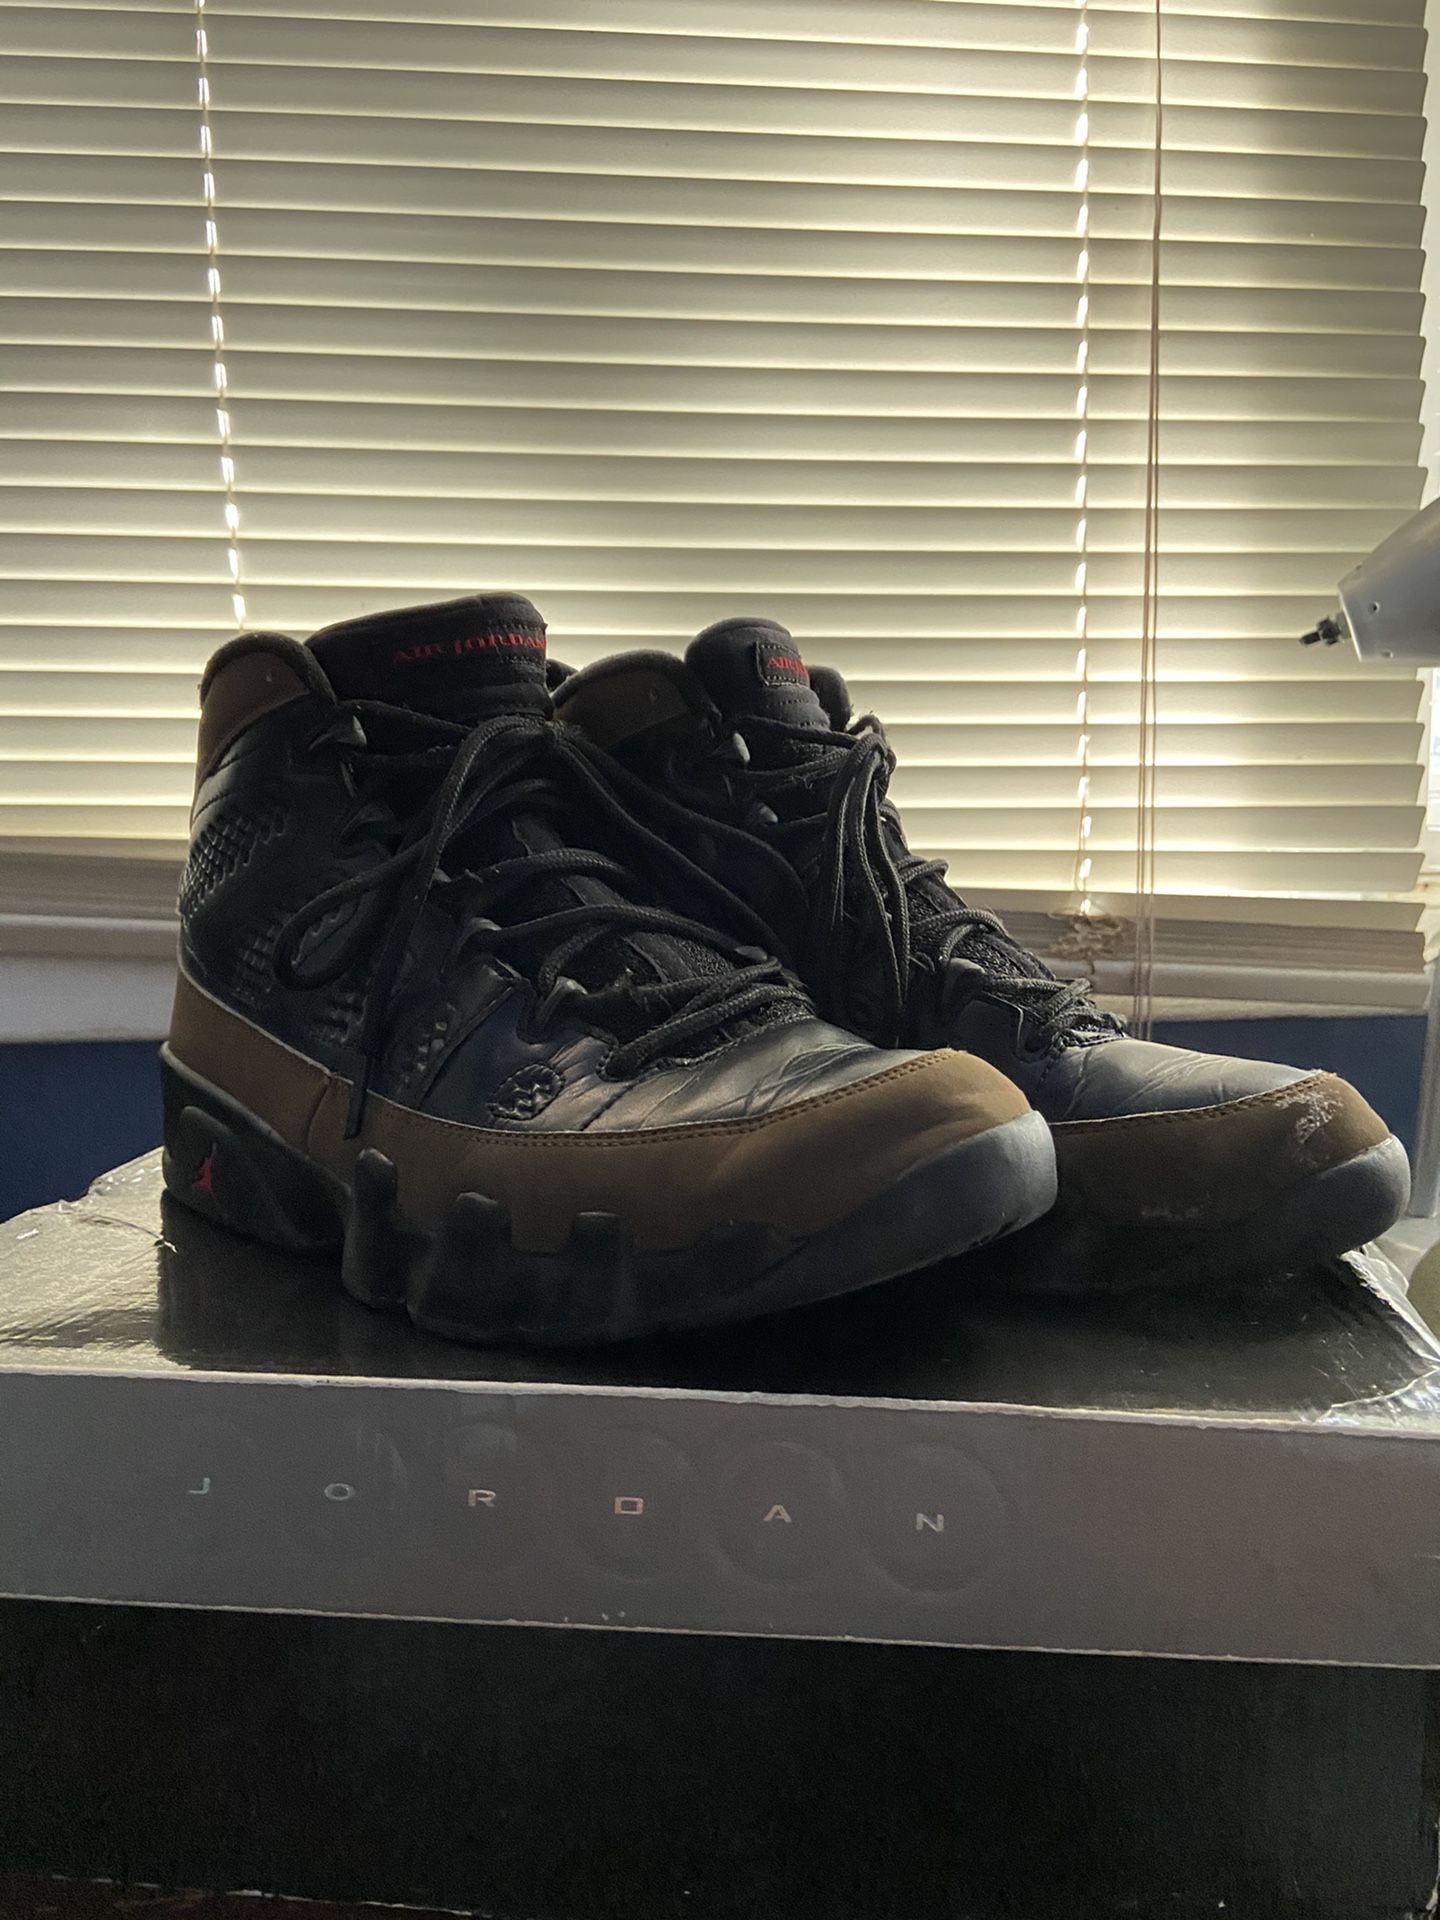 Olive 9s size 9.5